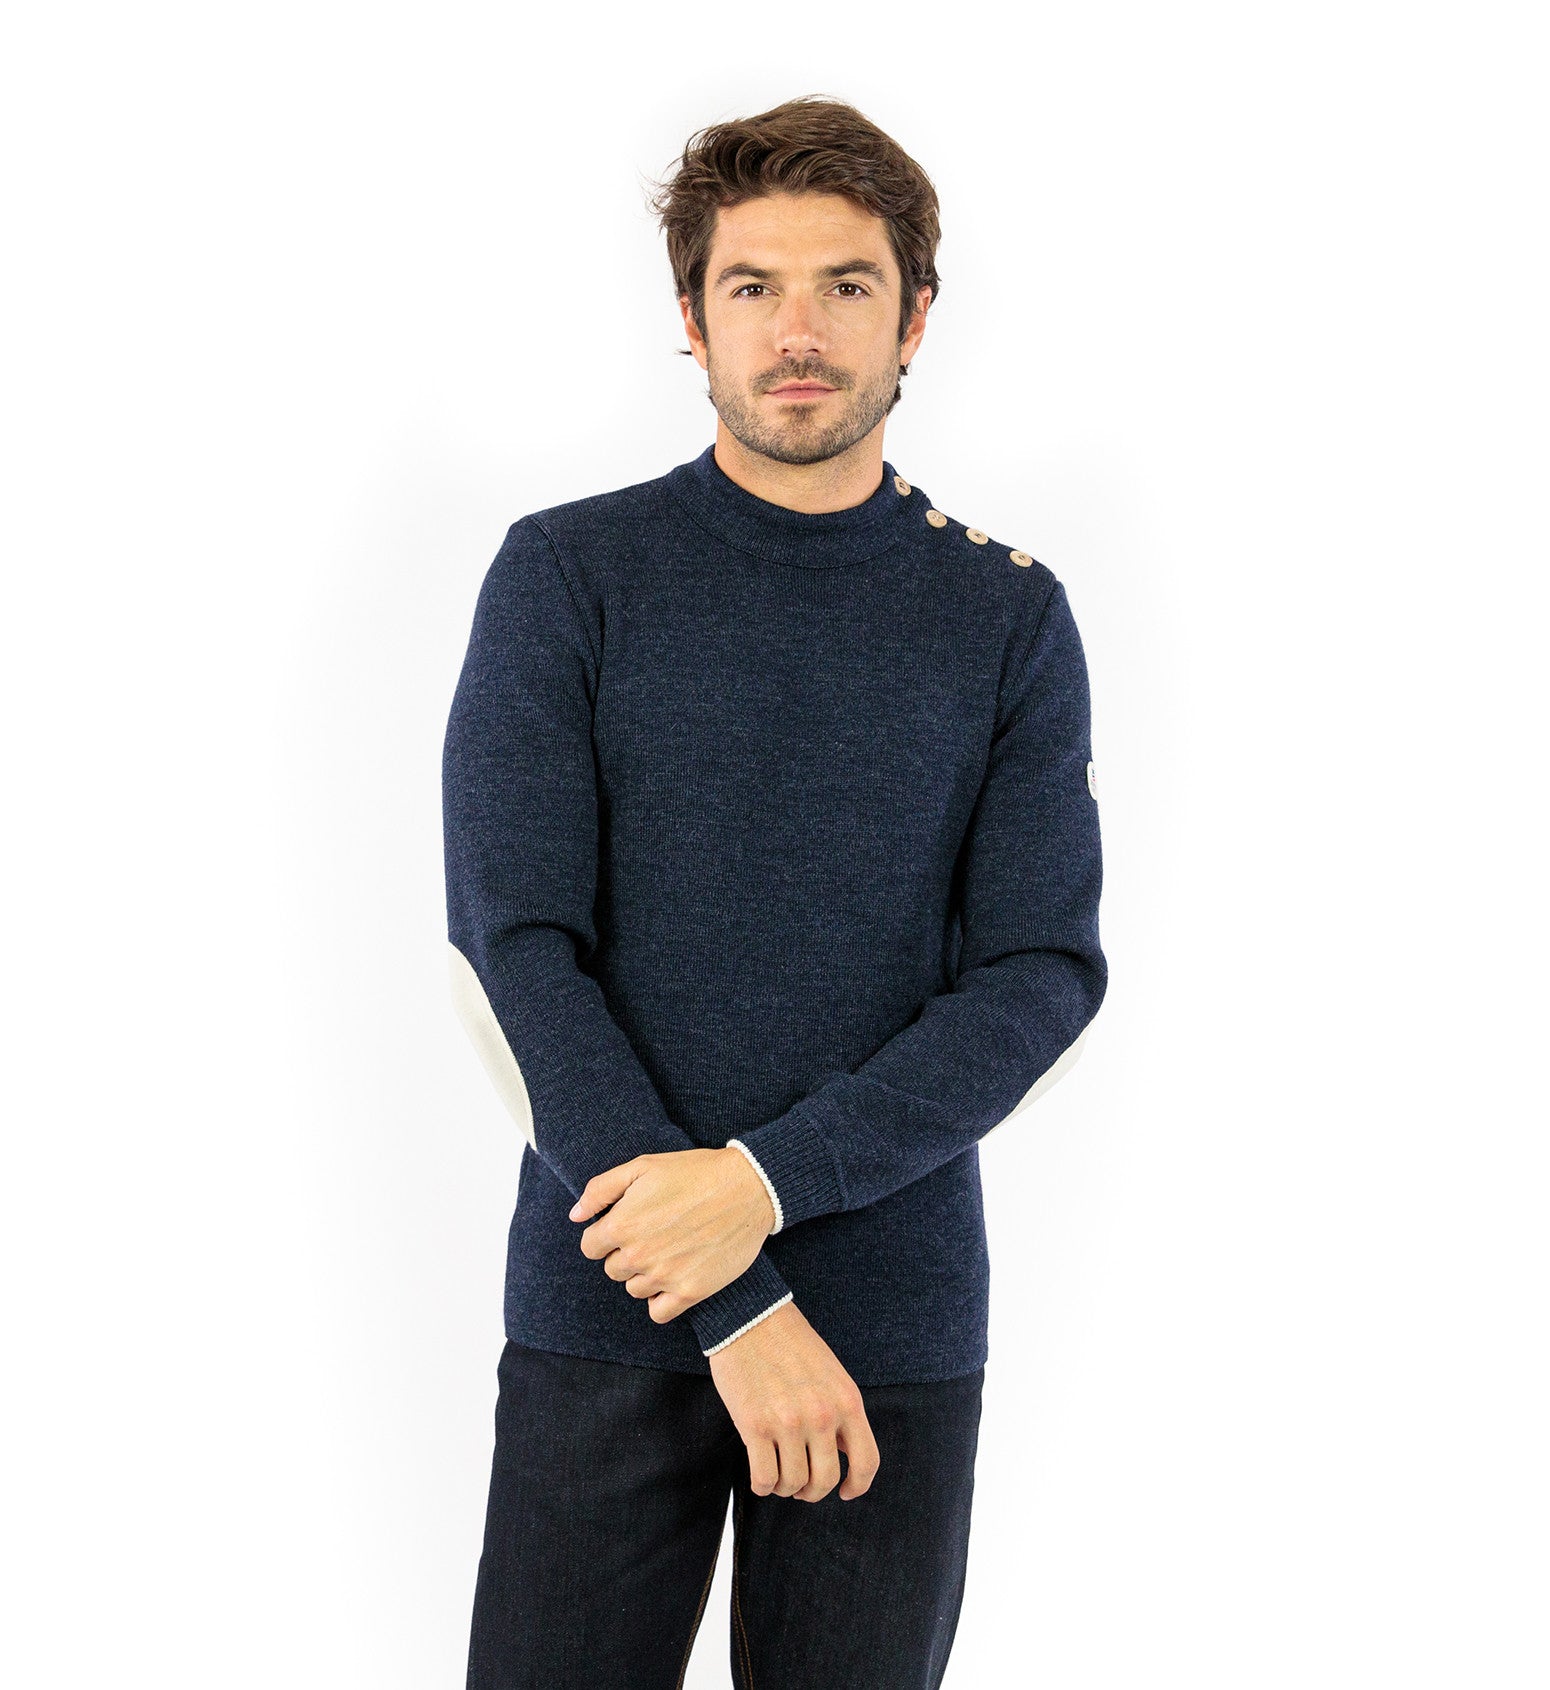 Plain sailor sweater with contrasting elbow patches